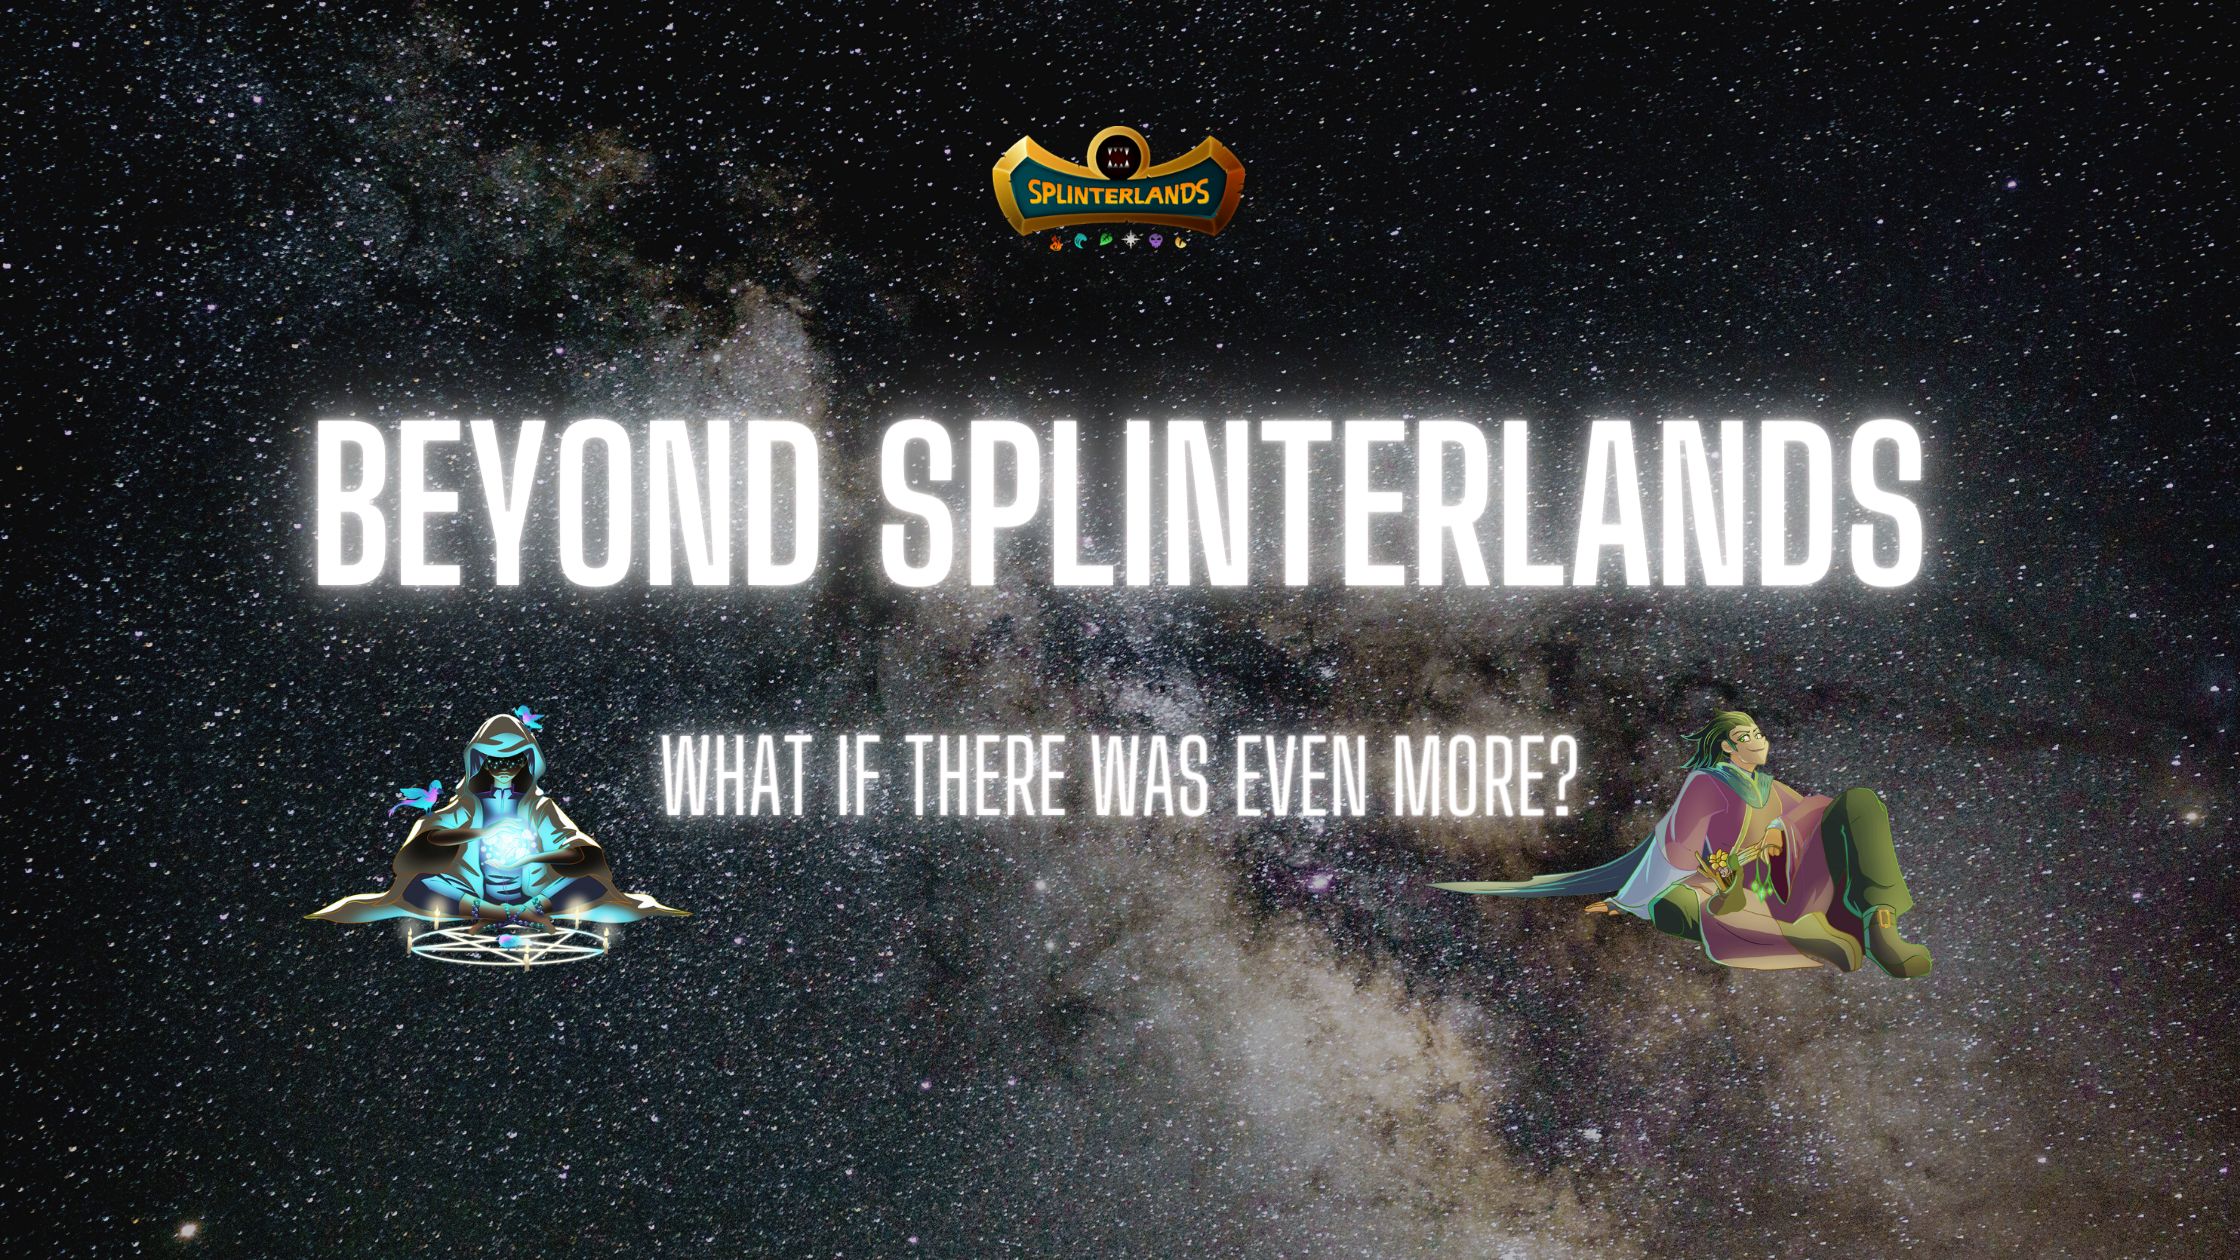 @brando28/beyond-splinterlands-what-if-there-was-even-more